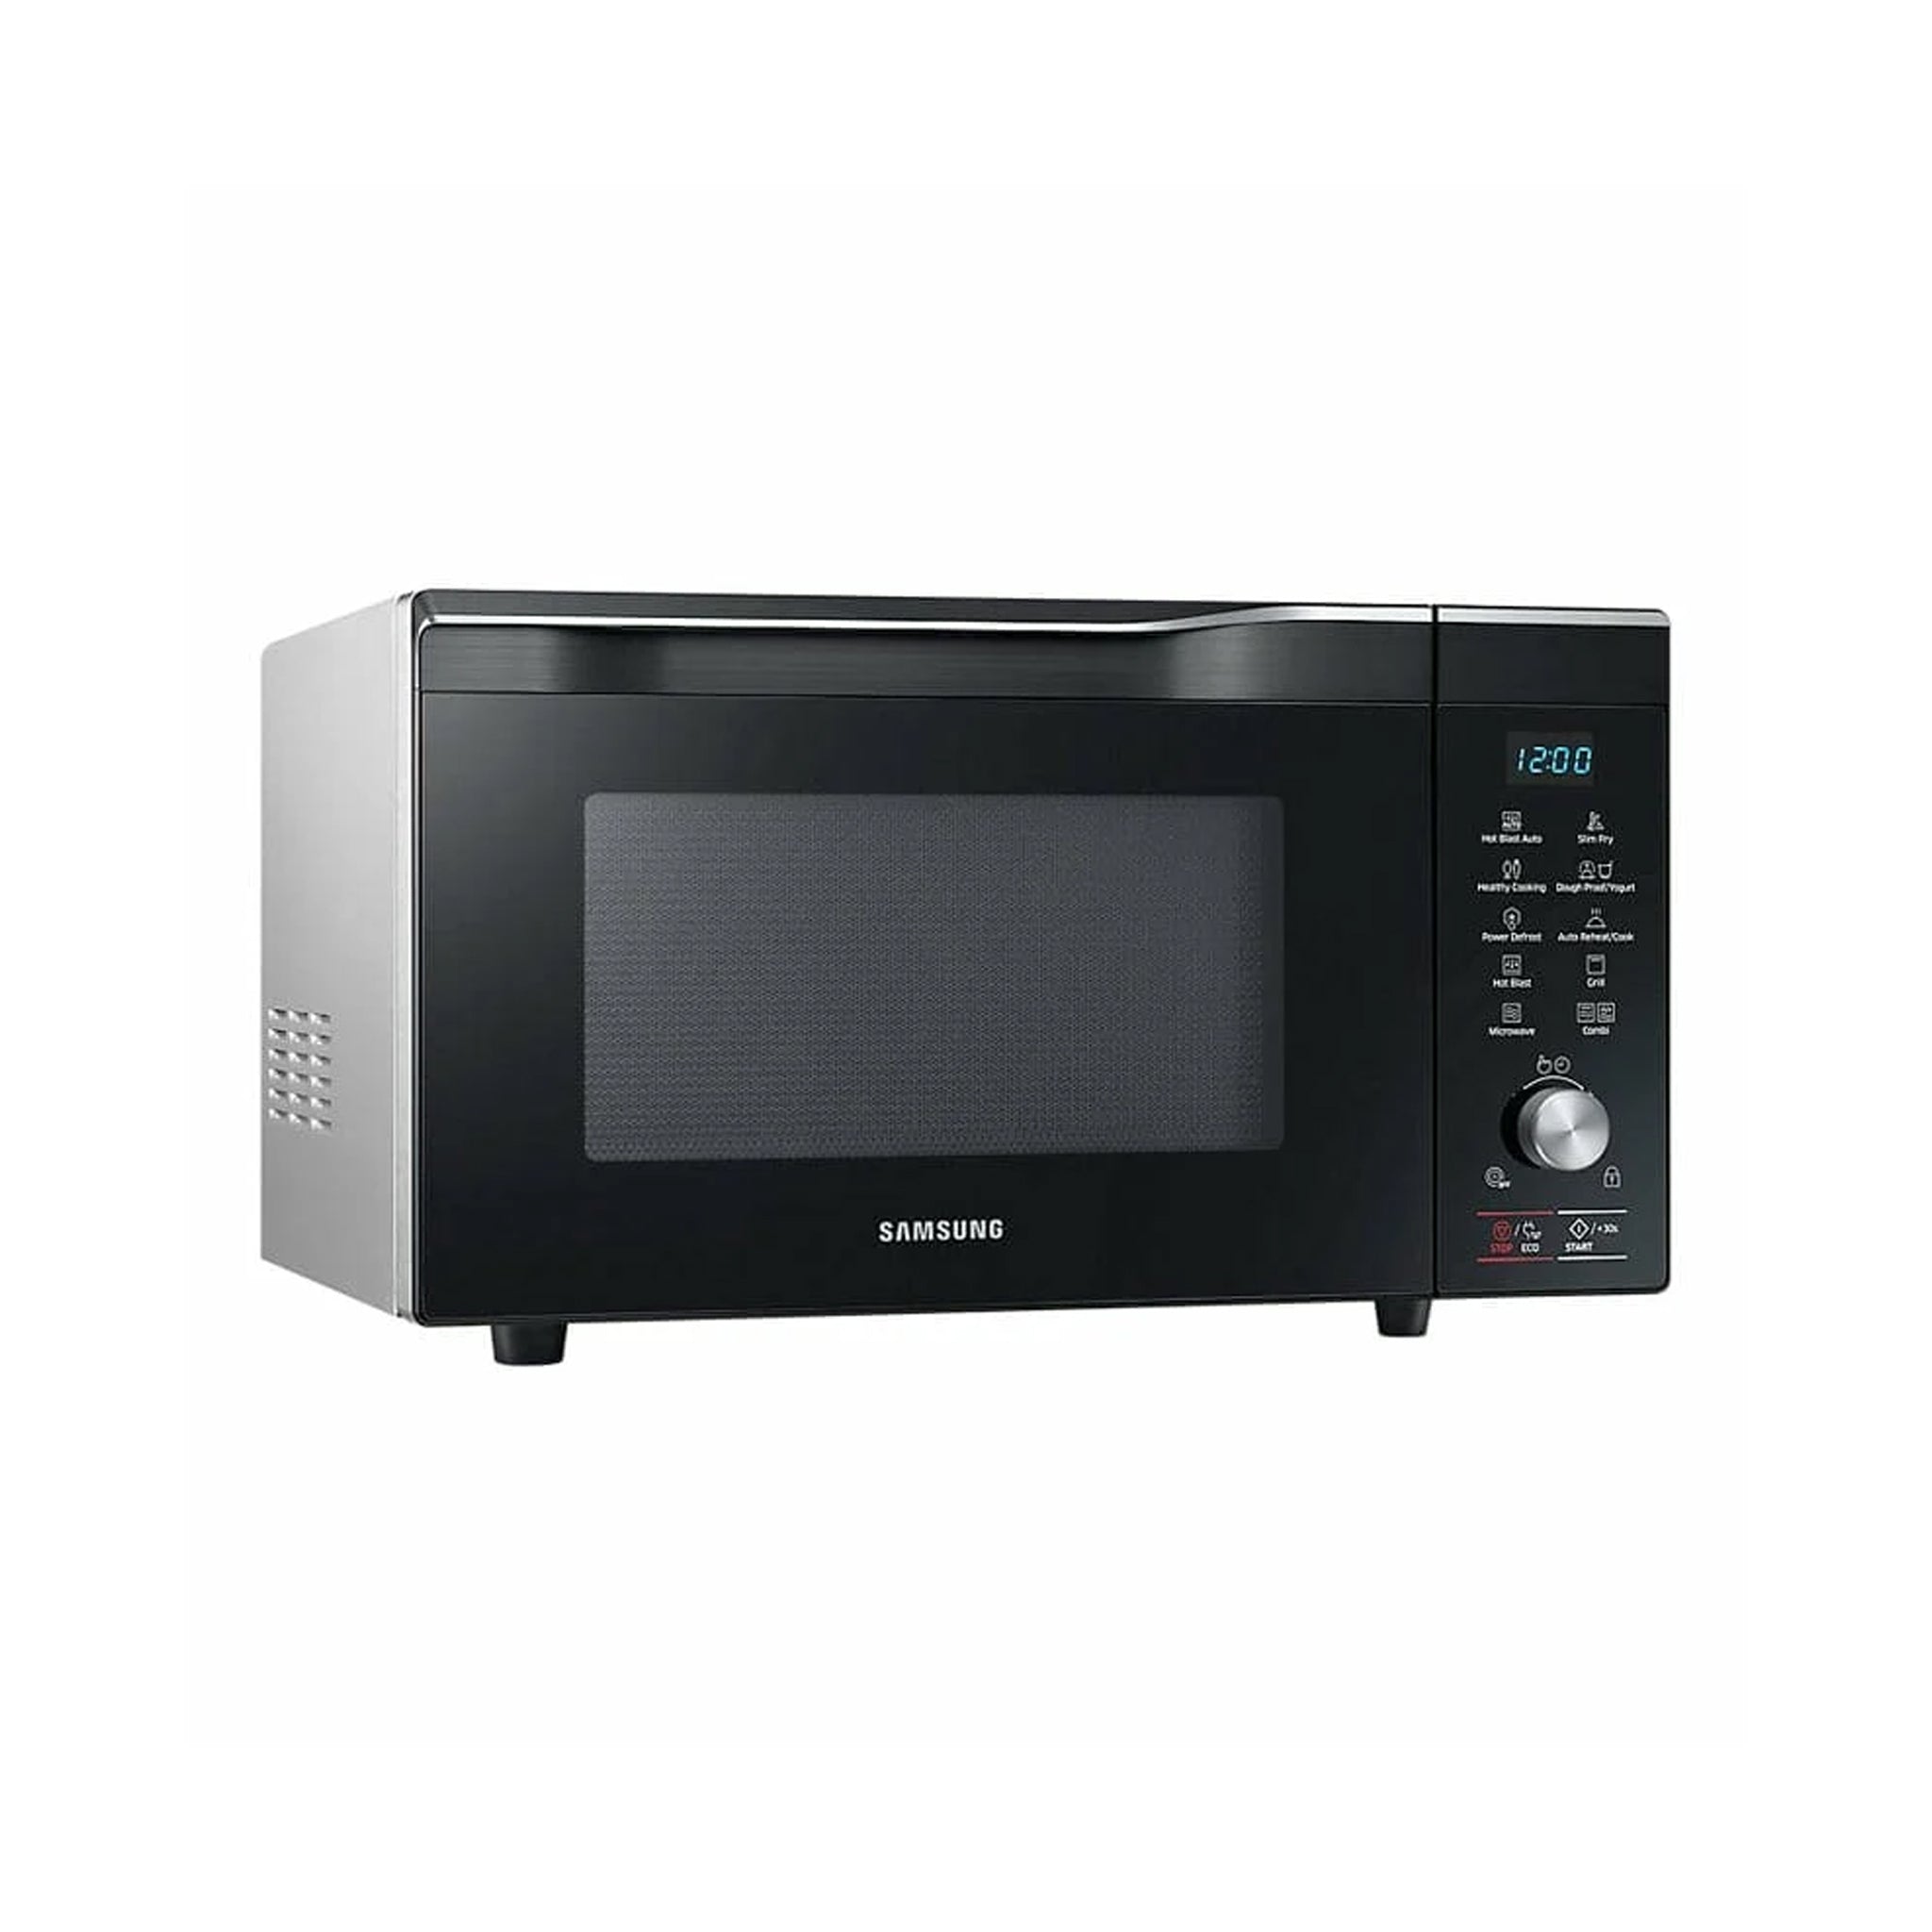 SAMSUNG 32L MC32K7055KT Smart Oven with Hot Blast Function Microwave Oven Samsung